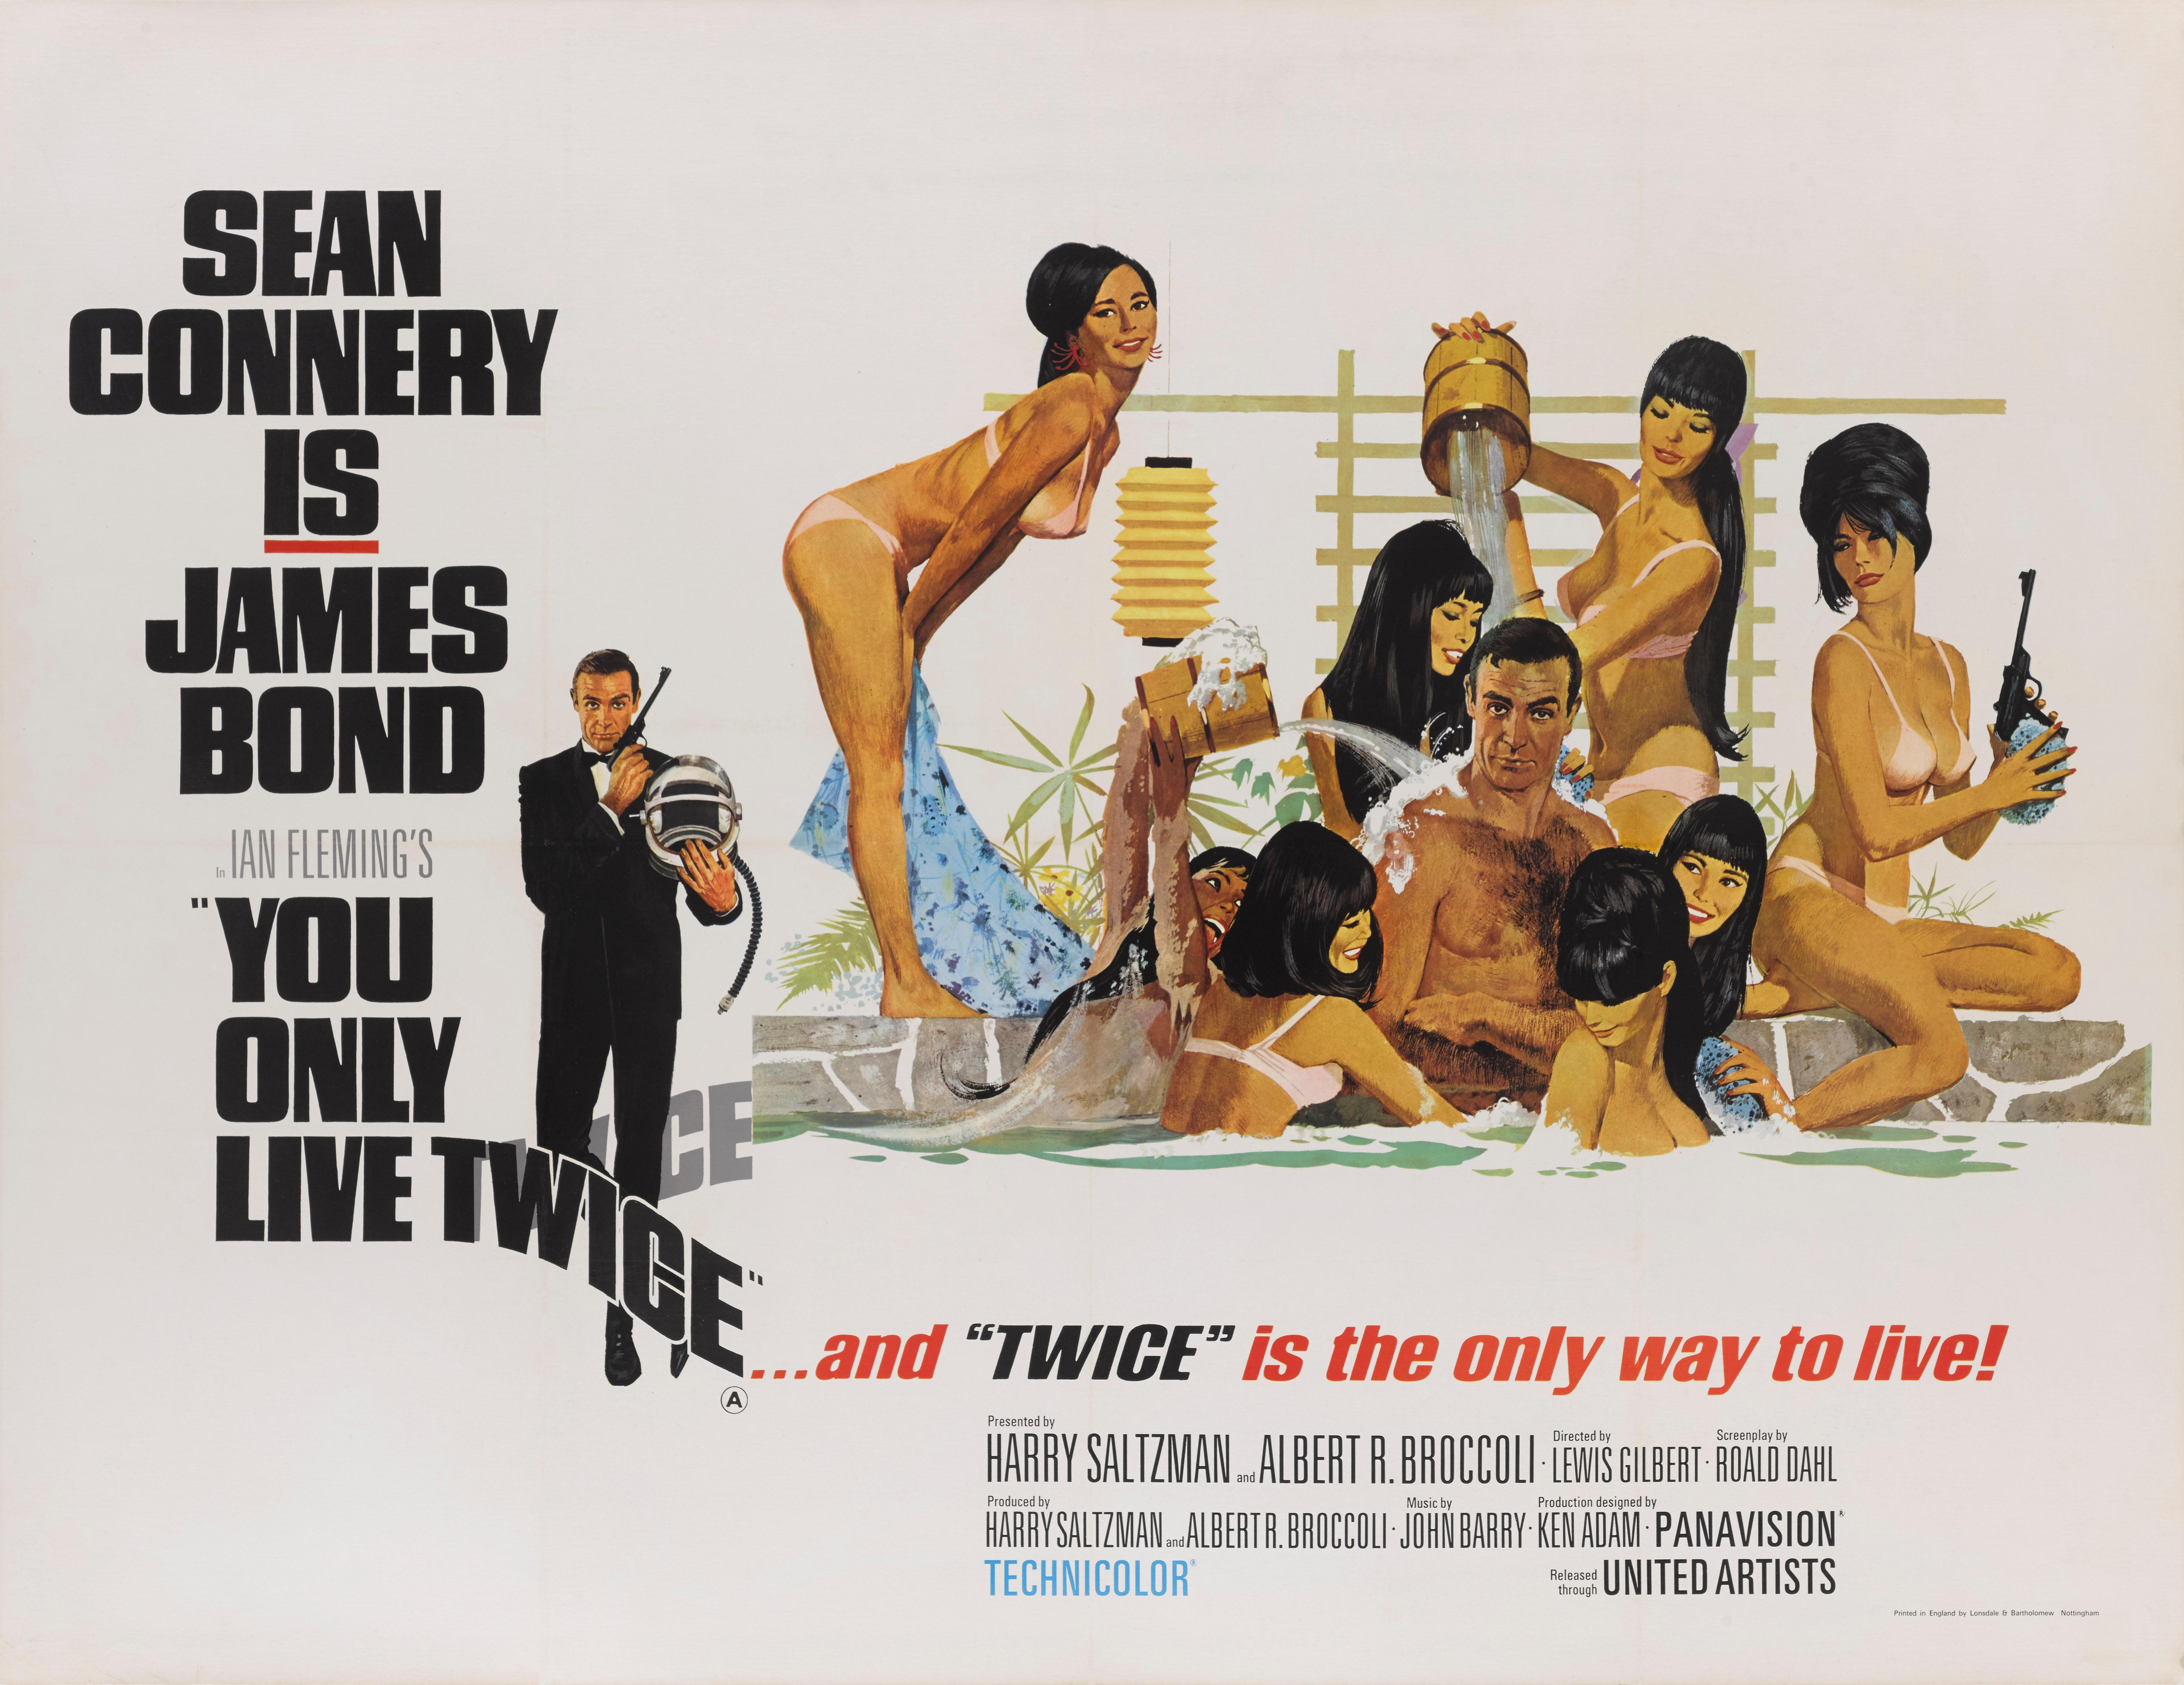 Original British movie poster for the fifth James Bond film.
This is one of three different style posters produced to advertise the film in the UK.
The advertising department for the film's release really went to town on their Campaign. They